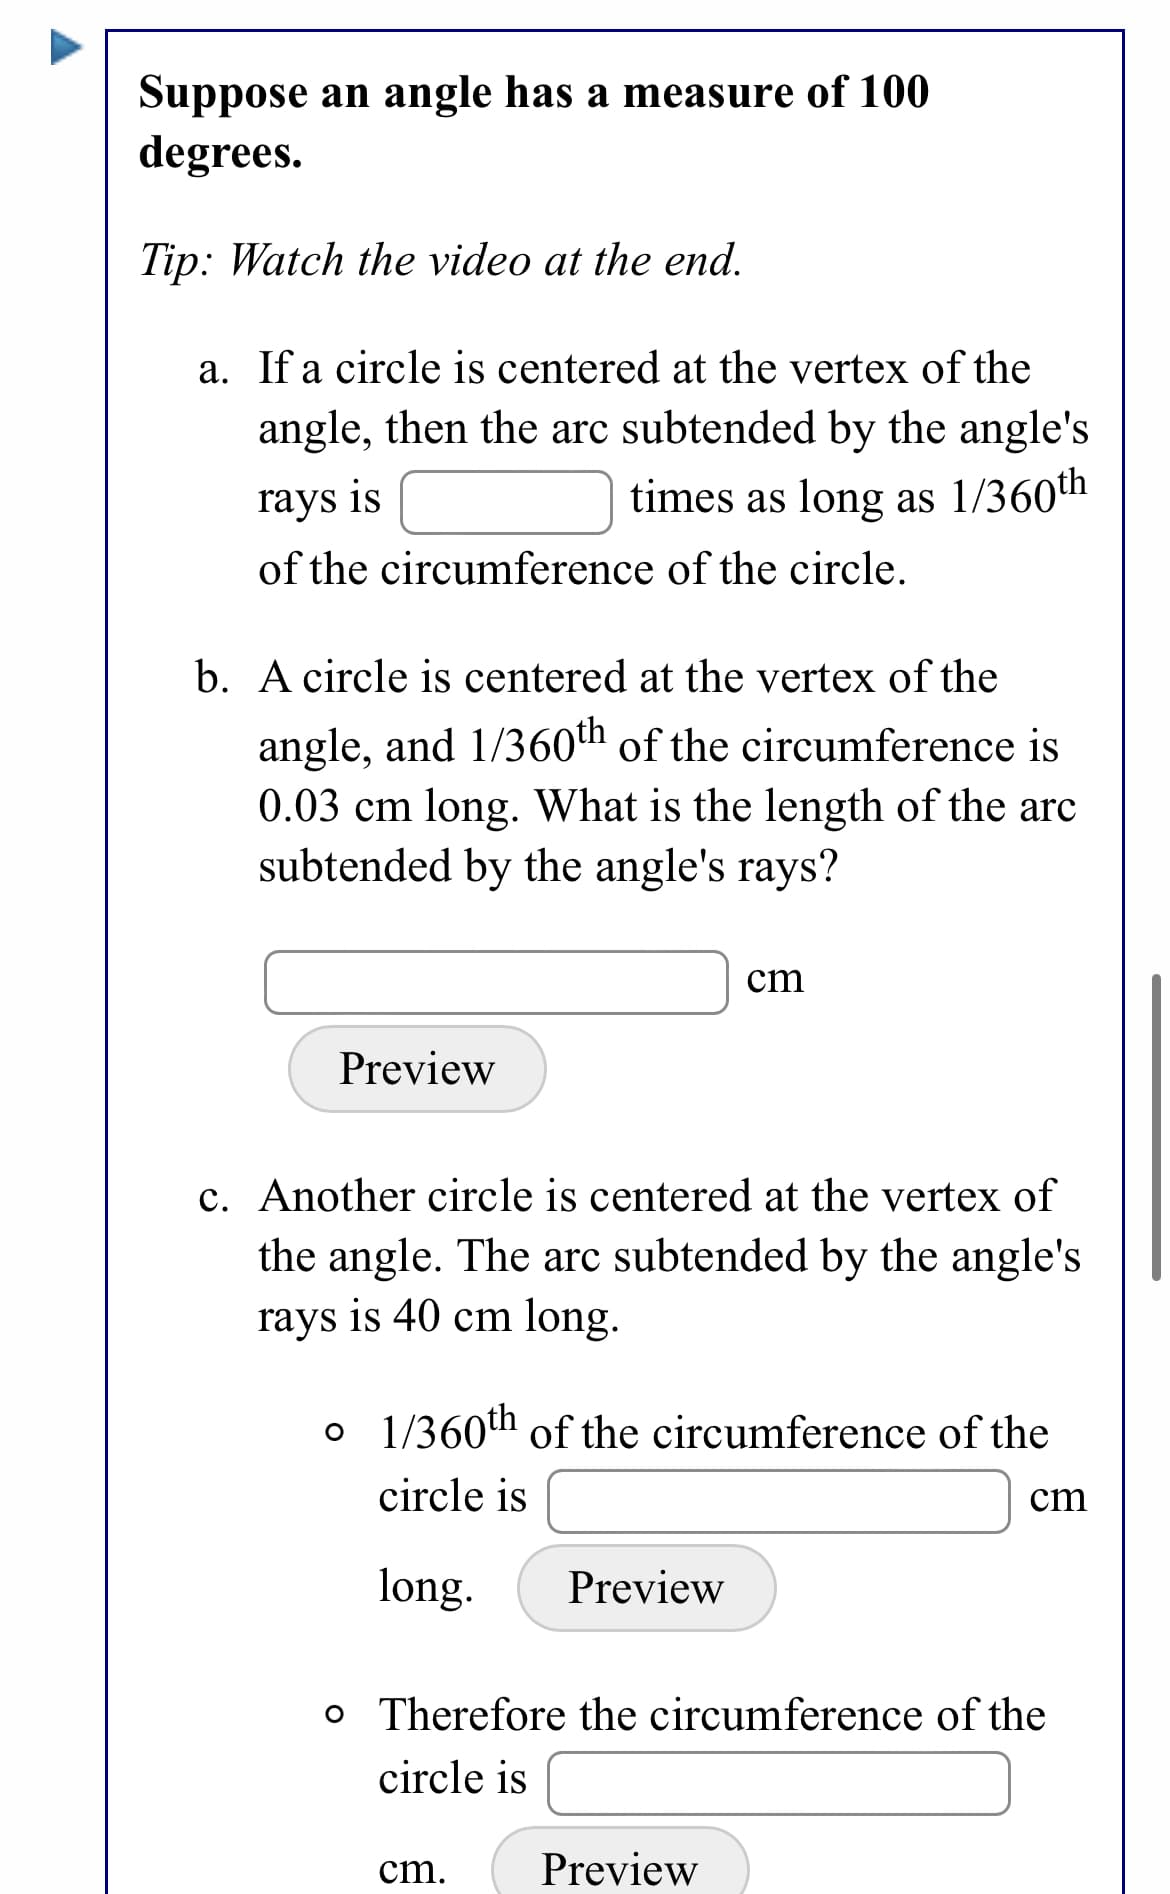 Suppose an angle has a measure of 100
degrees.
Tip: Watch the video at the end.
a. If a circle is centered at the vertex of the
angle, then the arc subtended by the angle's
rays is
times as long as 1/360th
of the circumference of the circle.
b. A circle is centered at the vertex of the
angle, and 1/36oth of the circumference is
0.03 cm long. What is the length of the arc
subtended by the angle's rays?
cm
Preview
c. Another circle is centered at the vertex of
the angle. The arc subtended by the angle's
rays is 40 cm long.
o 1/360th of the circumference of the
circle is
cm
long.
Preview
o Therefore the circumference of the
circle is
cm.
Preview
